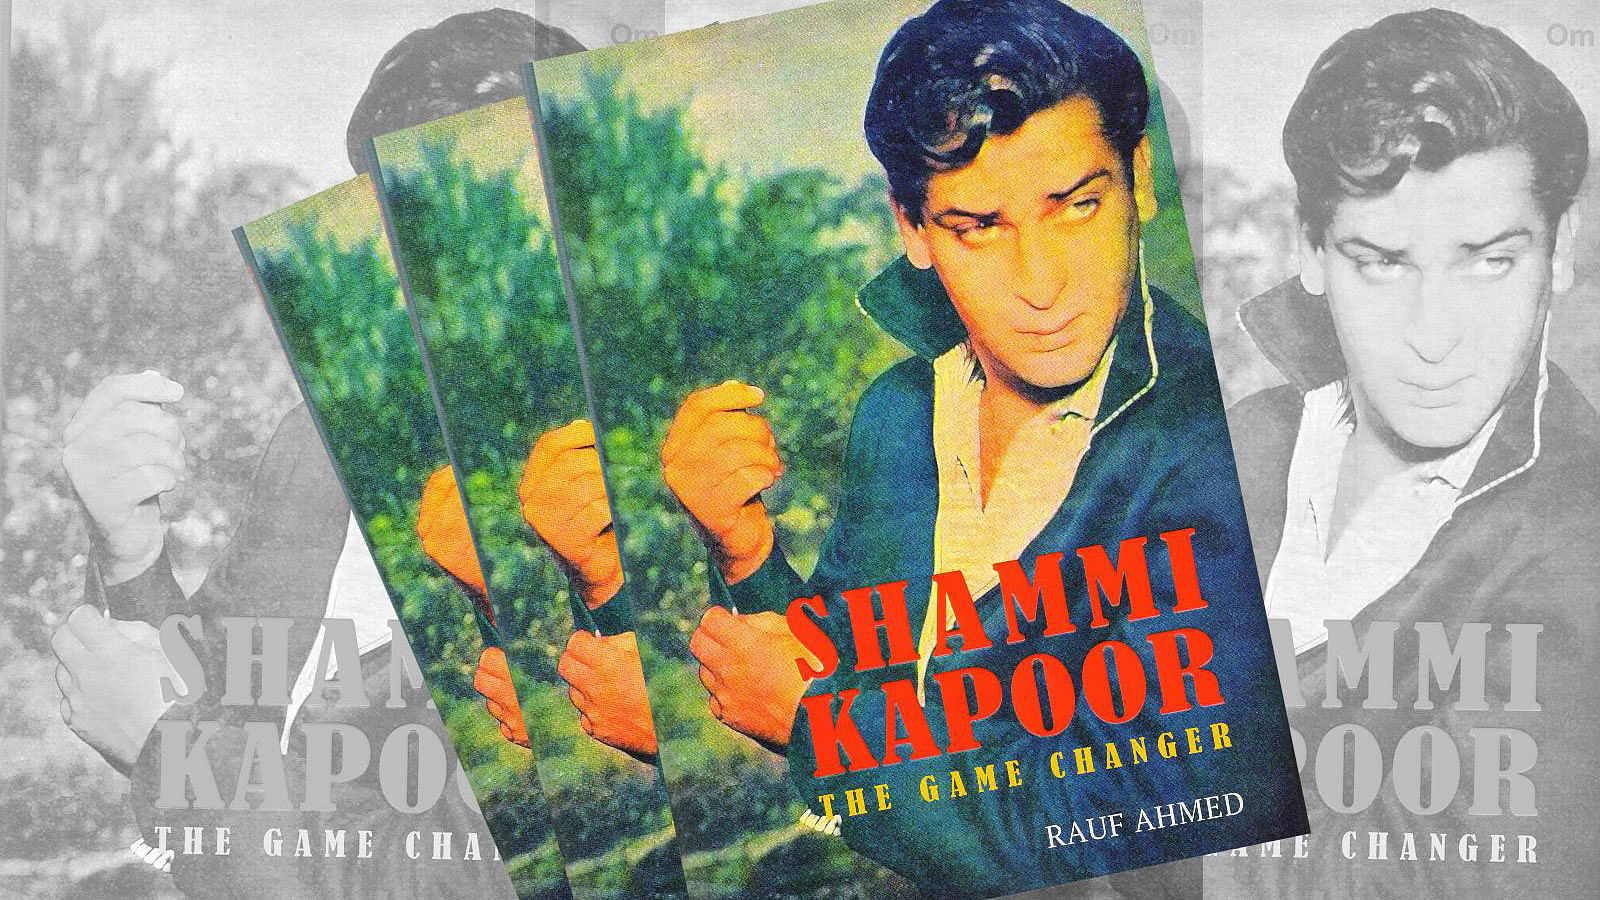 The fascinating life and times of Shammi Kapoor now recorded in a biography.